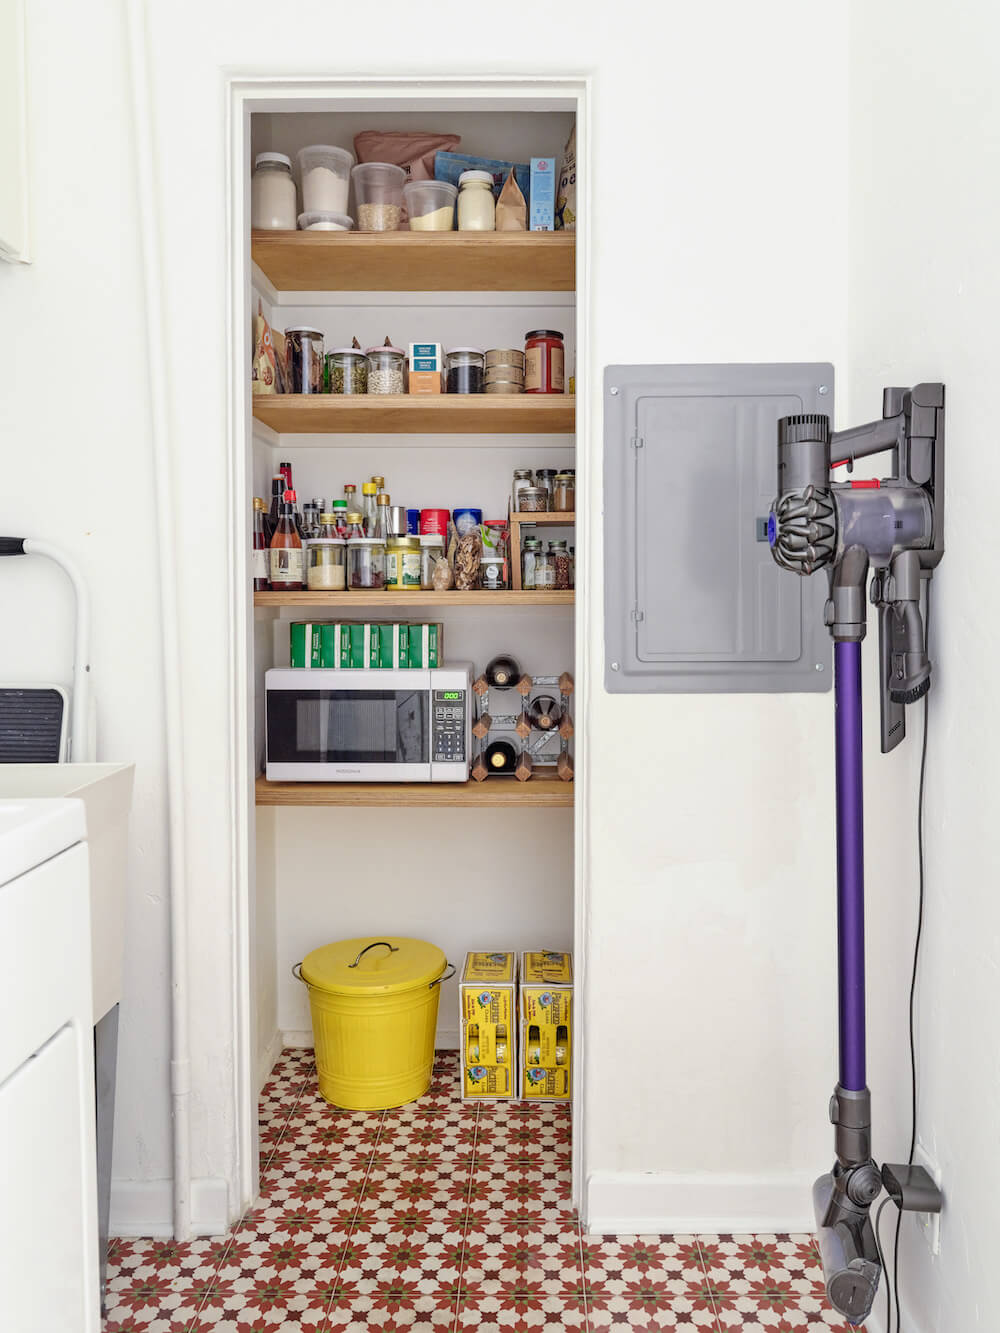 Pantry storage in laundry room with wooden open shelves and microwave storage